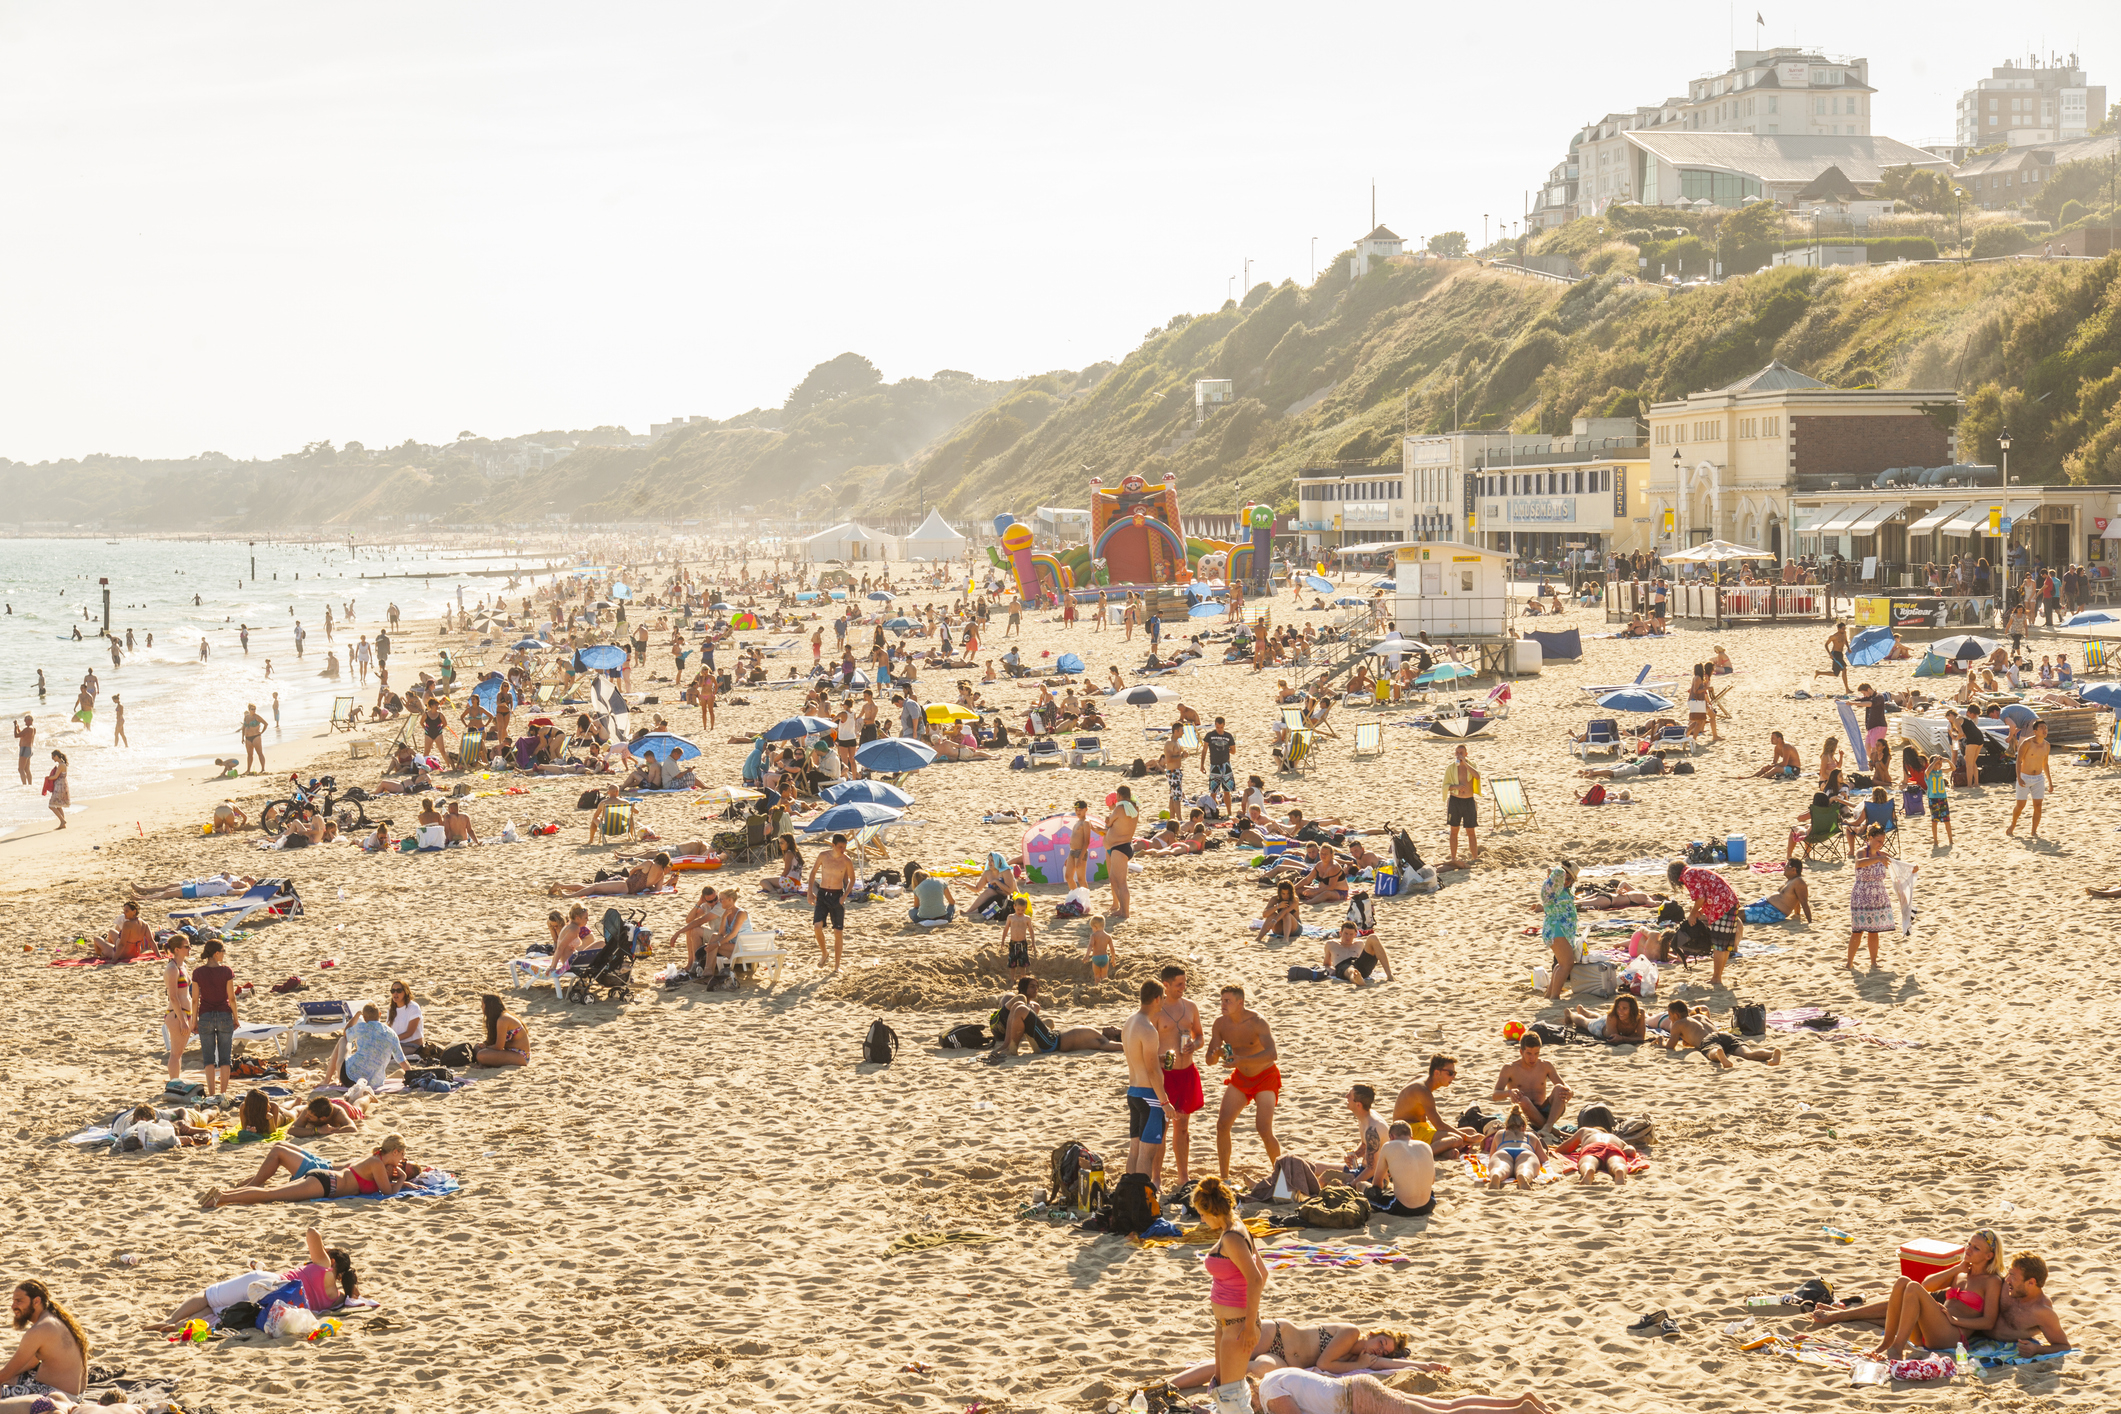 Busy beach scene with people sunbathing and walking, including umbrellas and a backdrop of buildings on a hill